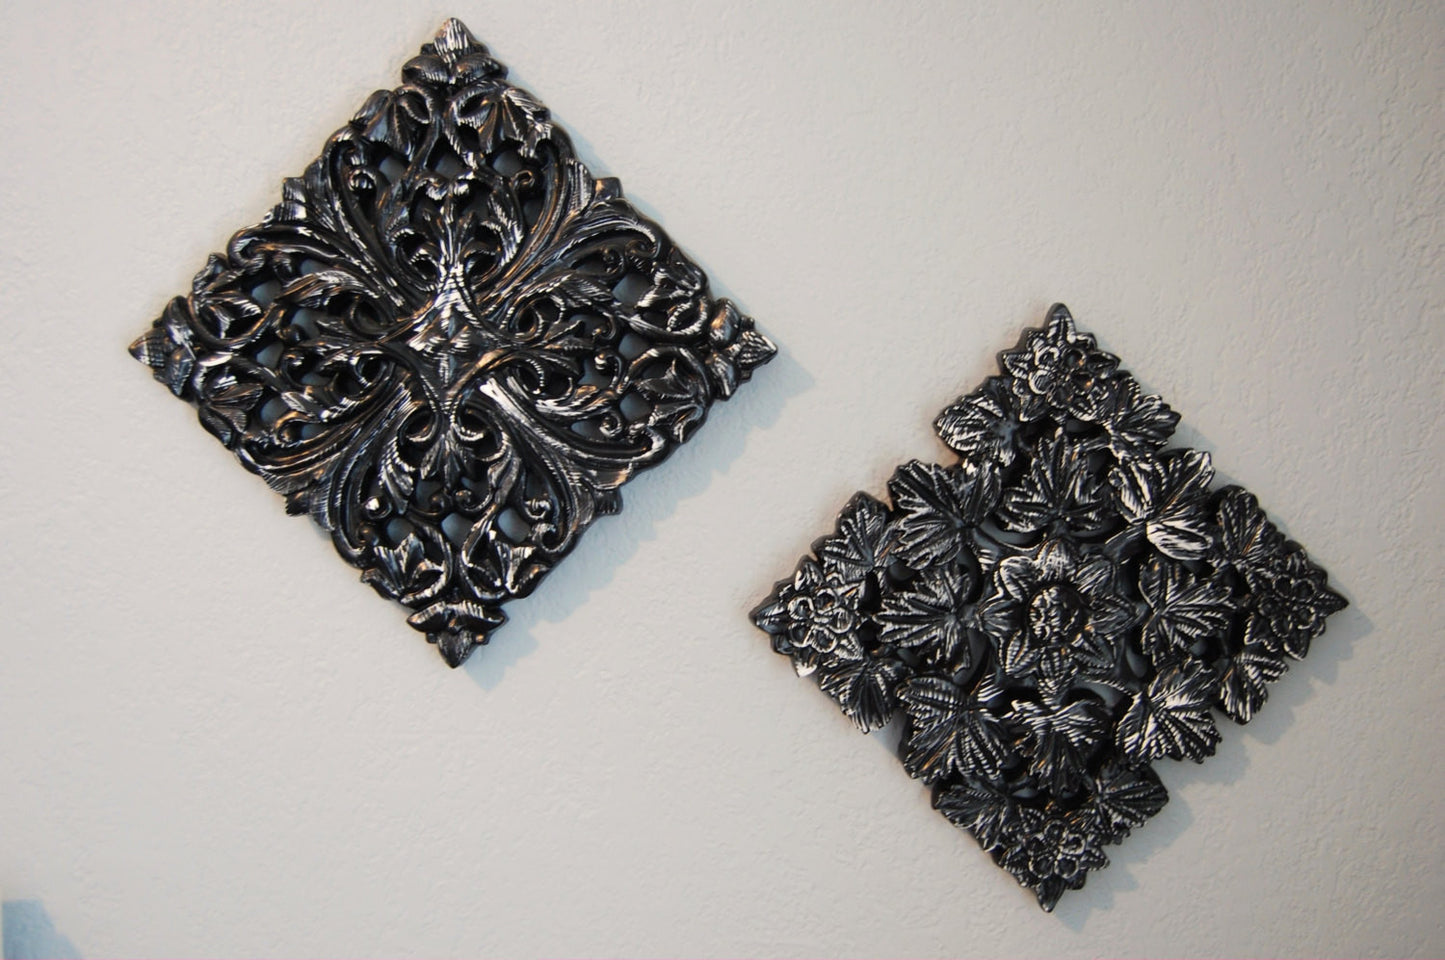 Black and white wall decor - The Vintage Artistry